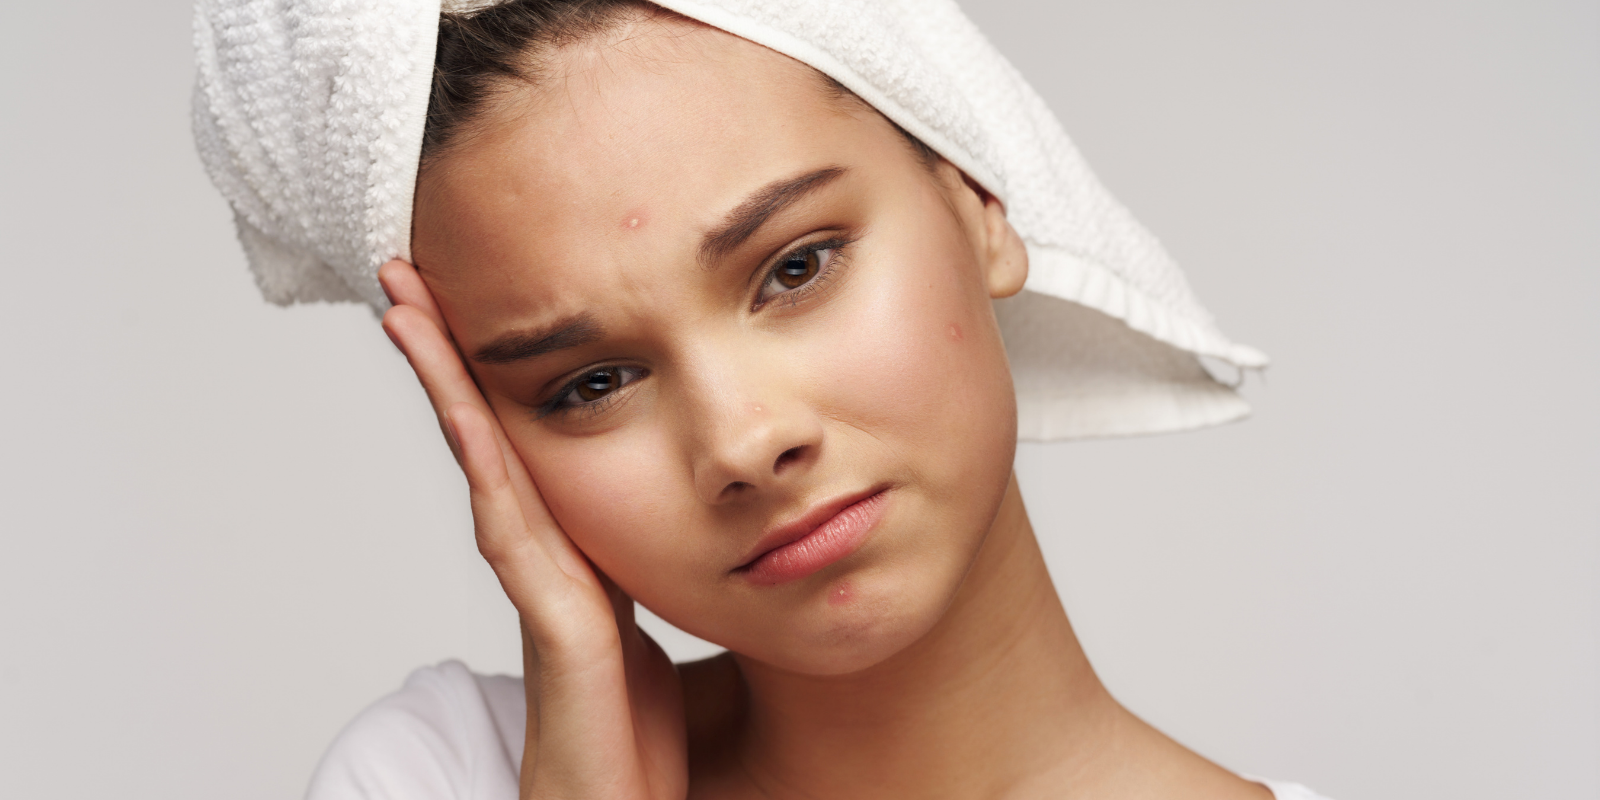 AcneFree | How to get rid of pimples